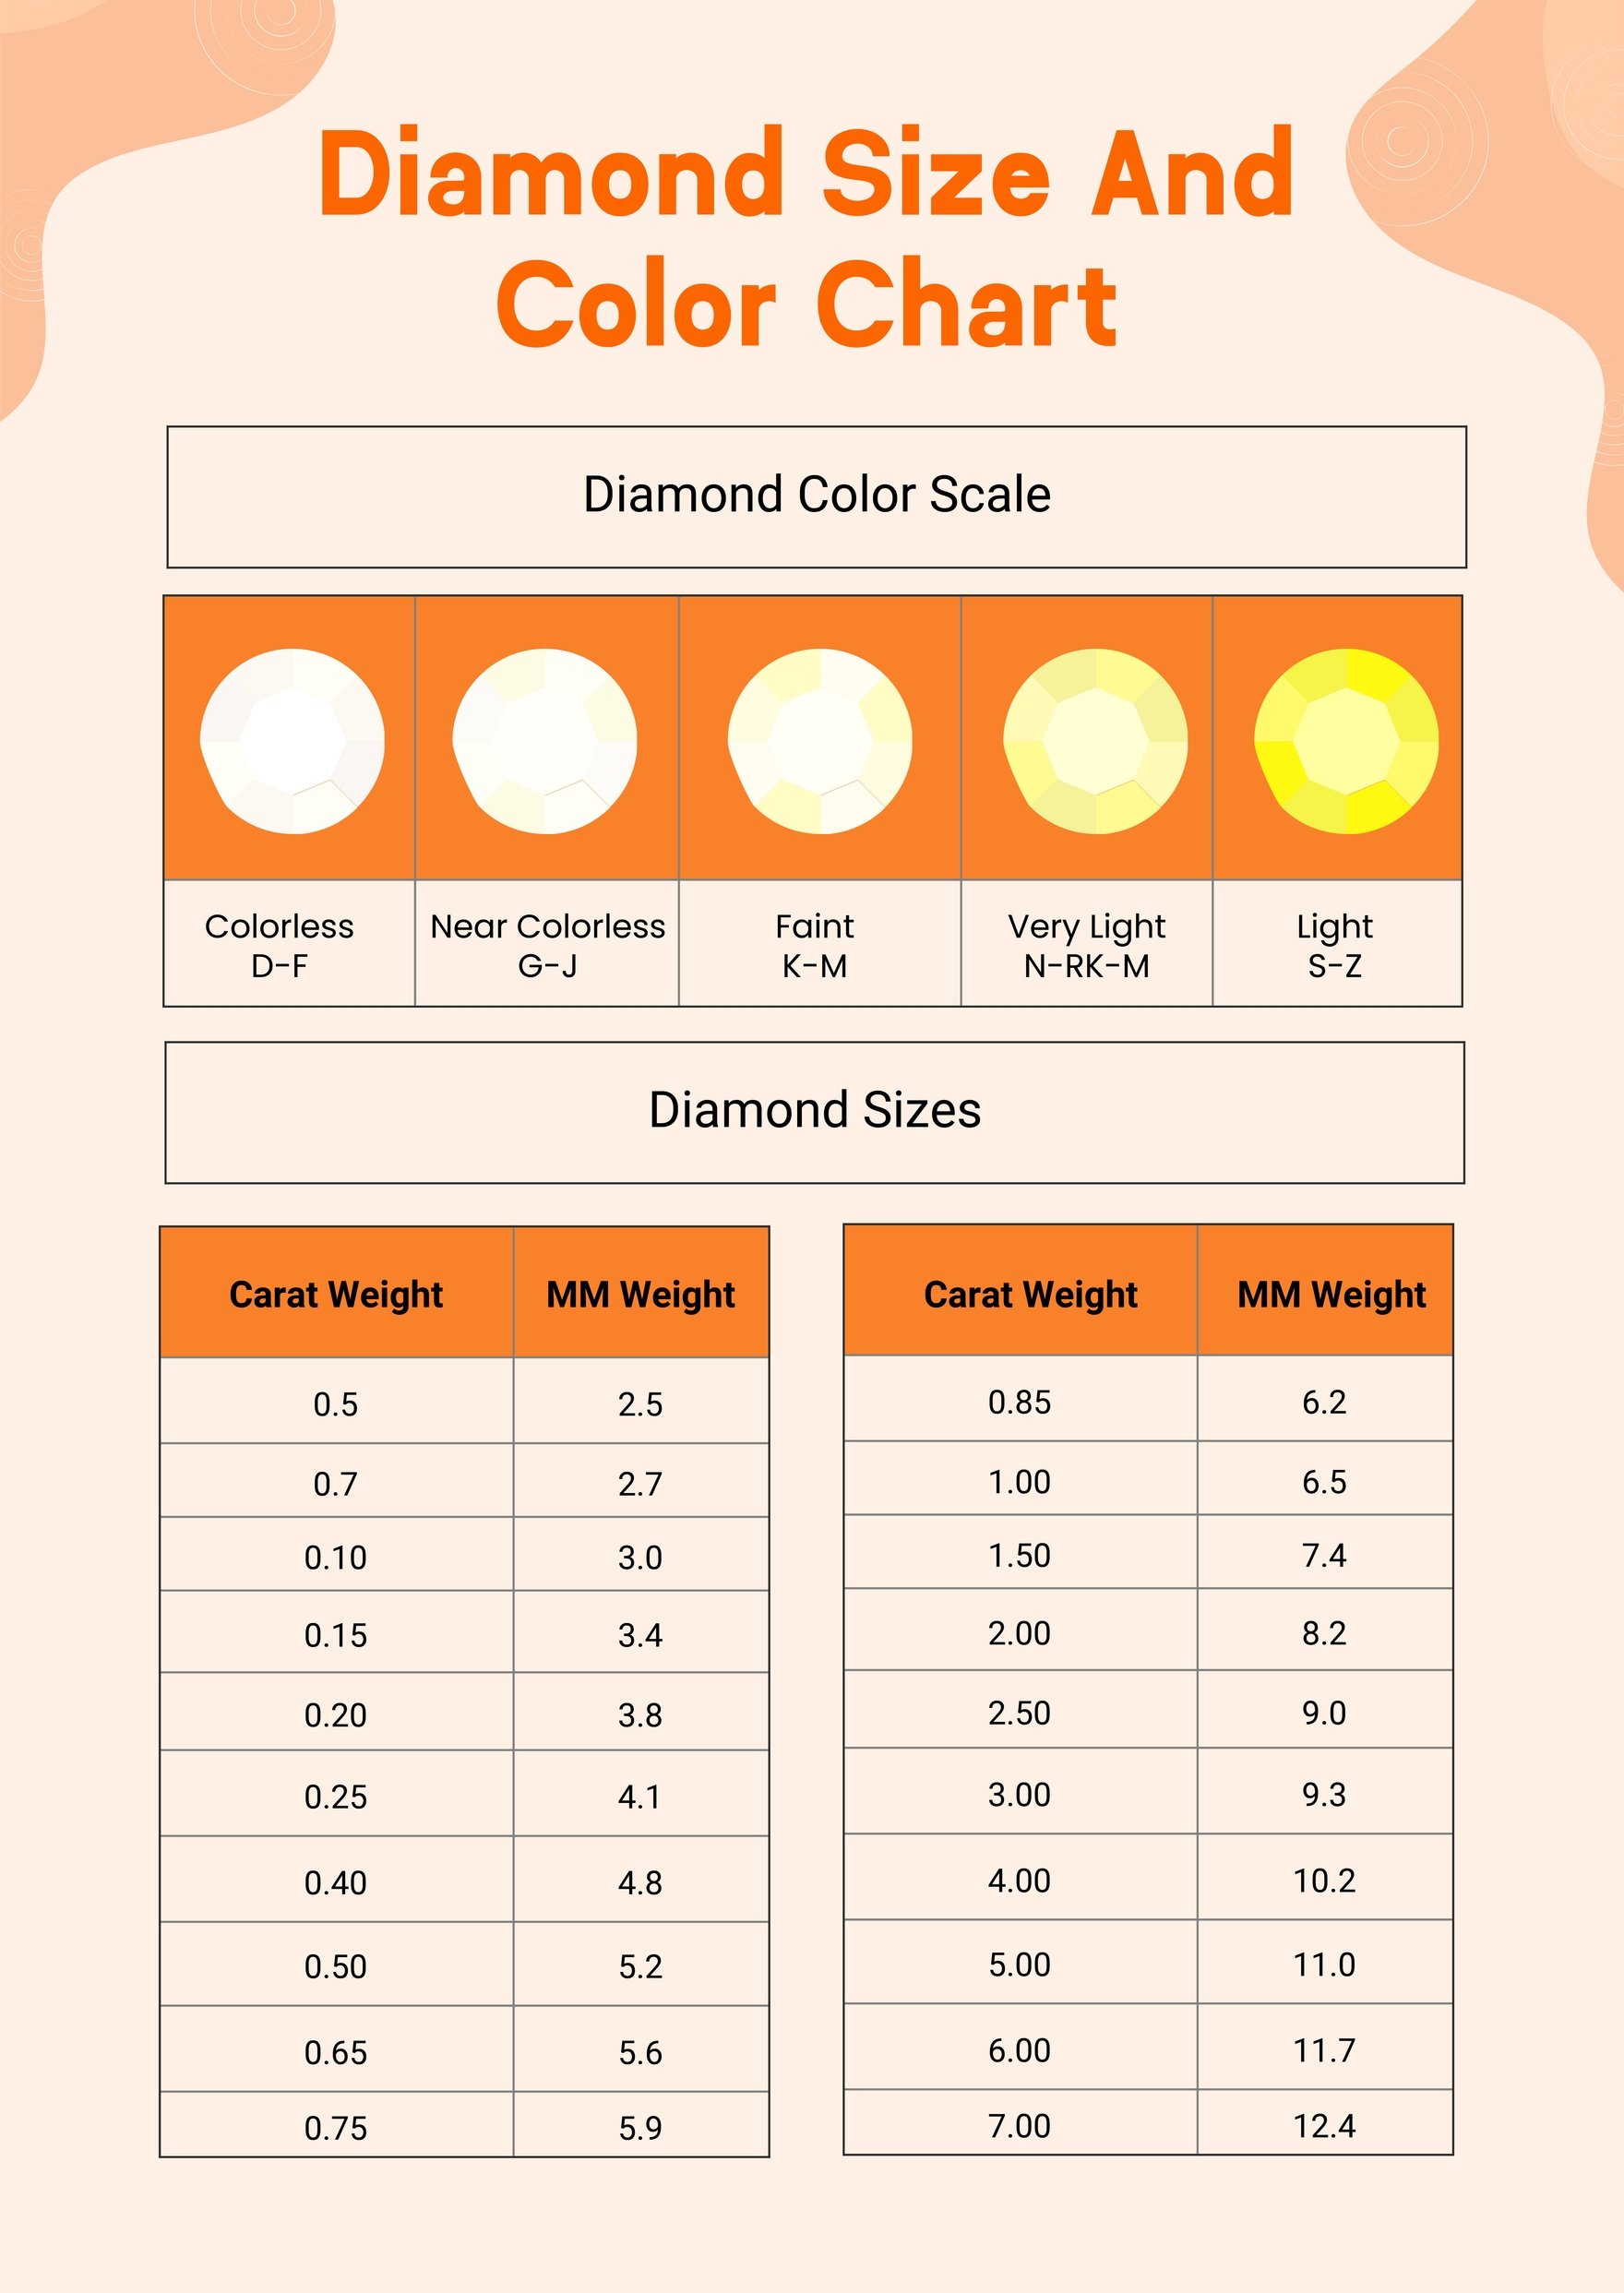 Diamond Size And Color Chart